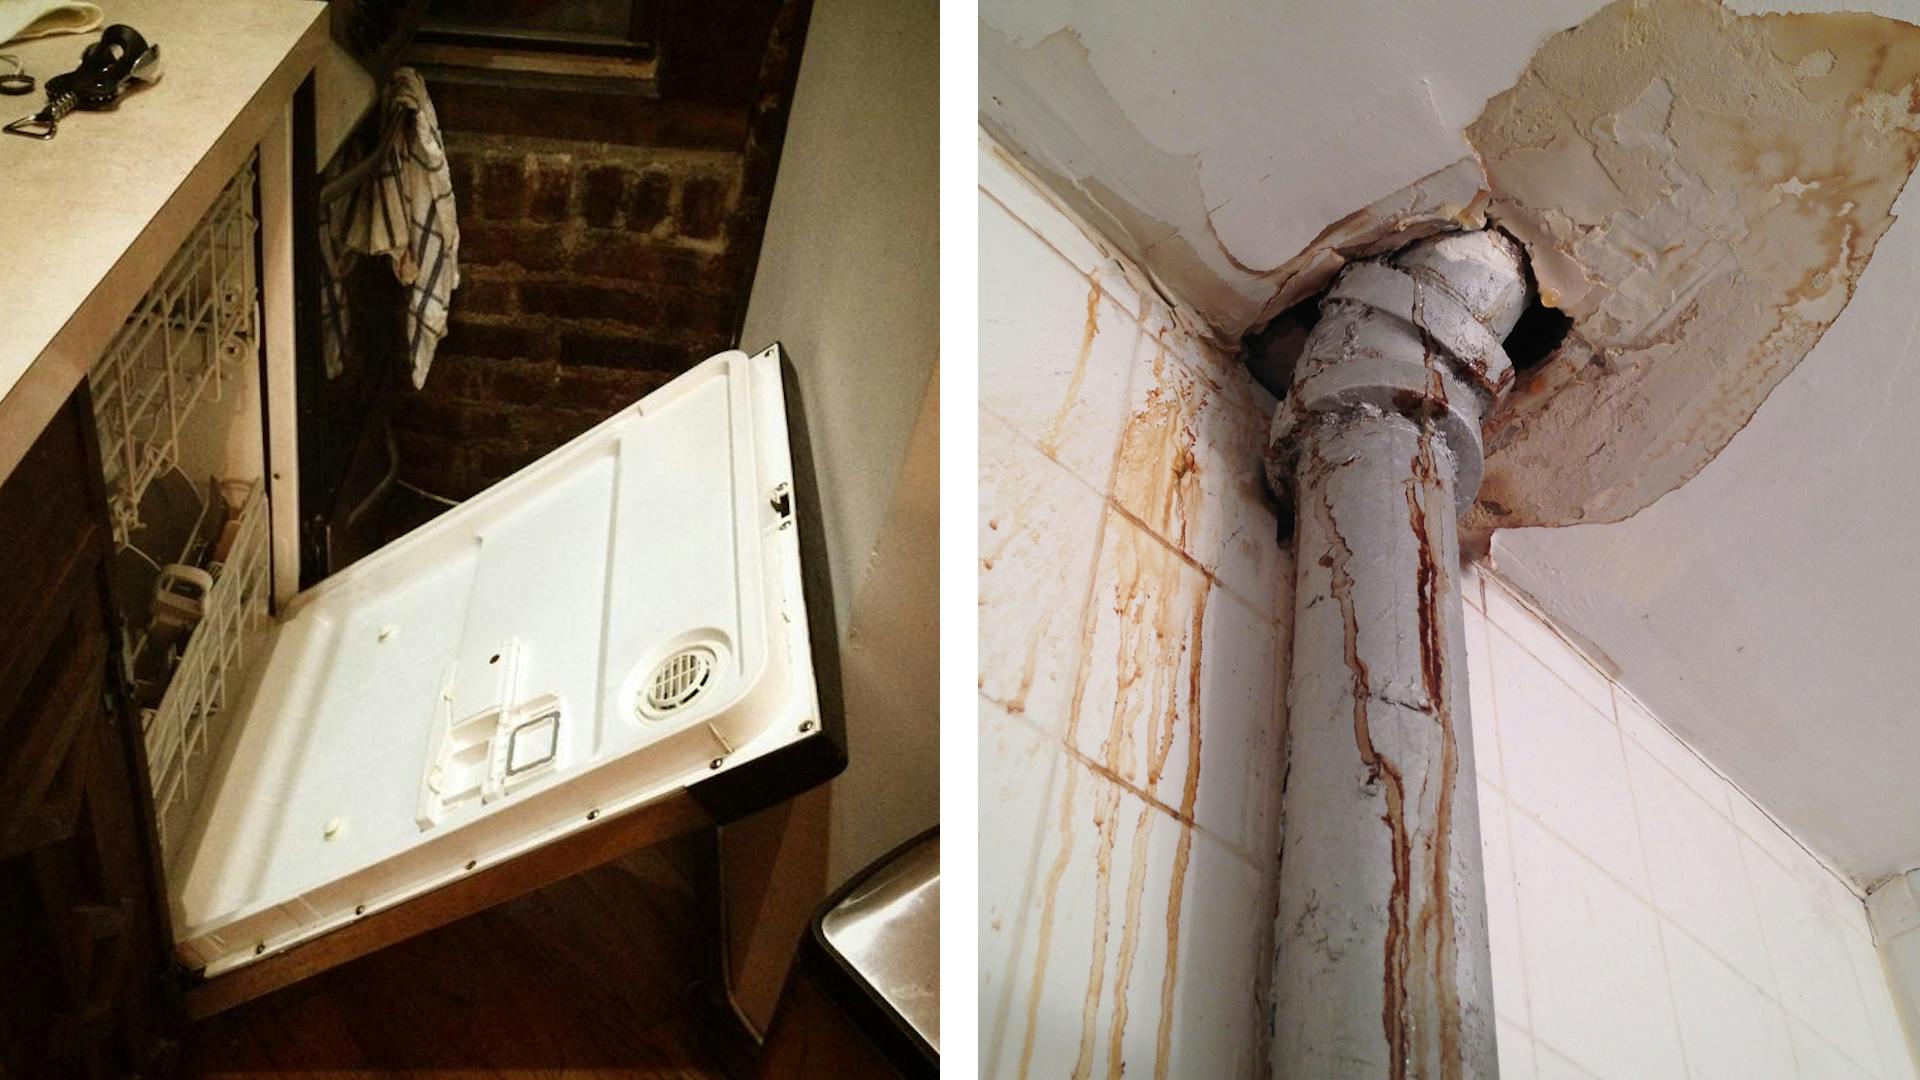 Big Apple. Small kitchens. And... leaks from pipes you're afraid to ask your landlord about. 